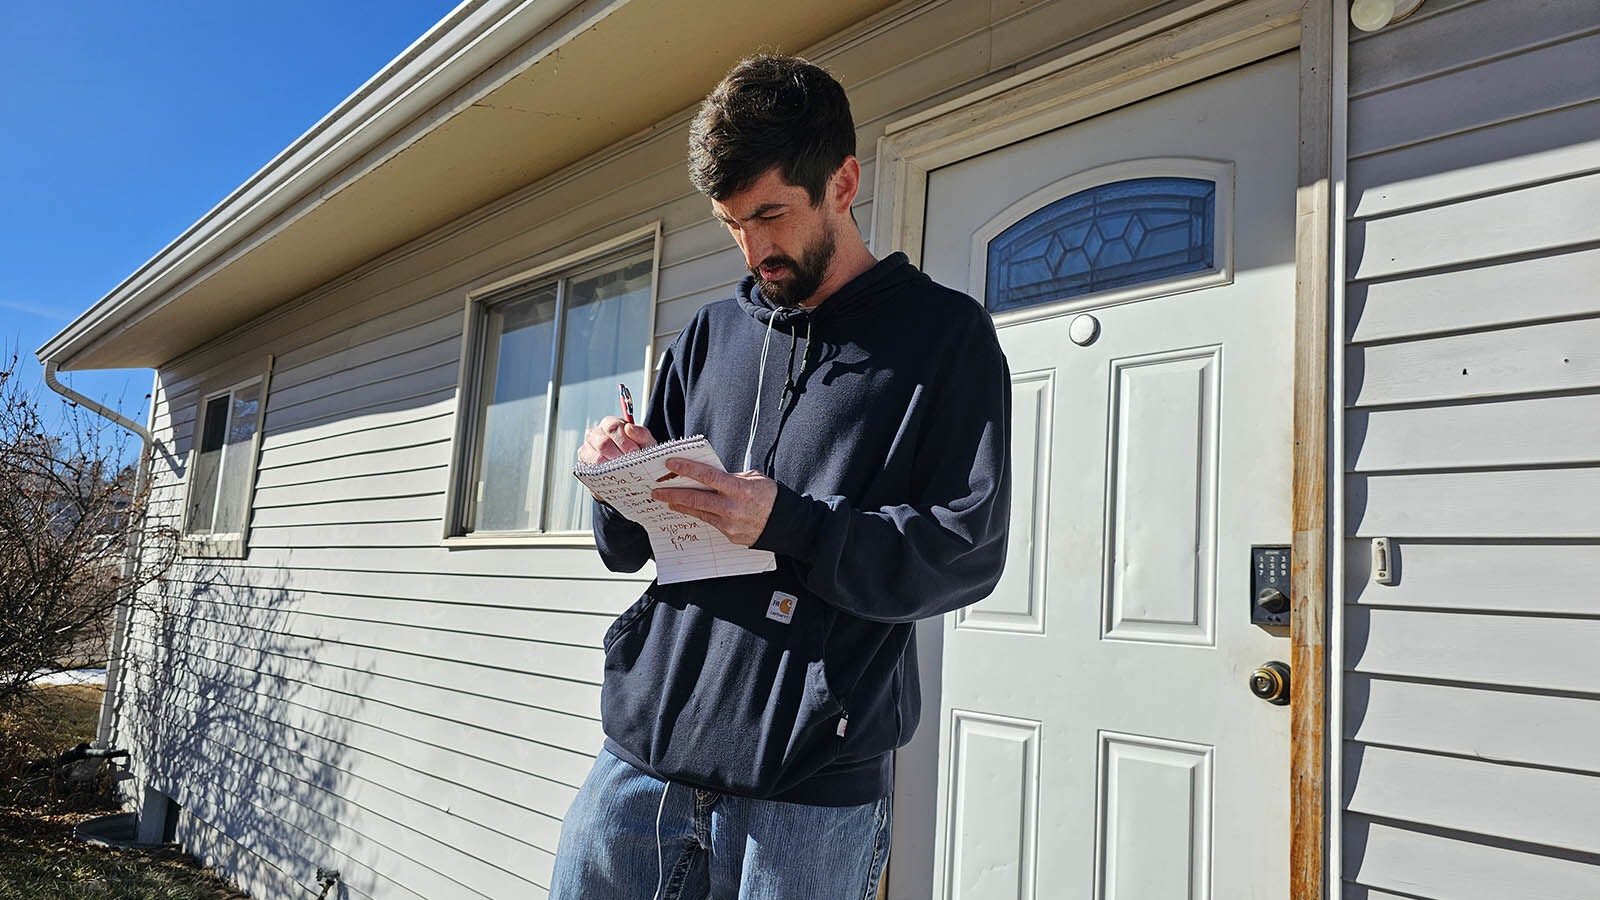 Landyn Medina makes a note after visiting one of the households in a neighborhood that was inundated with floodwaters after a 12-inch water main busted in Cheyenne.